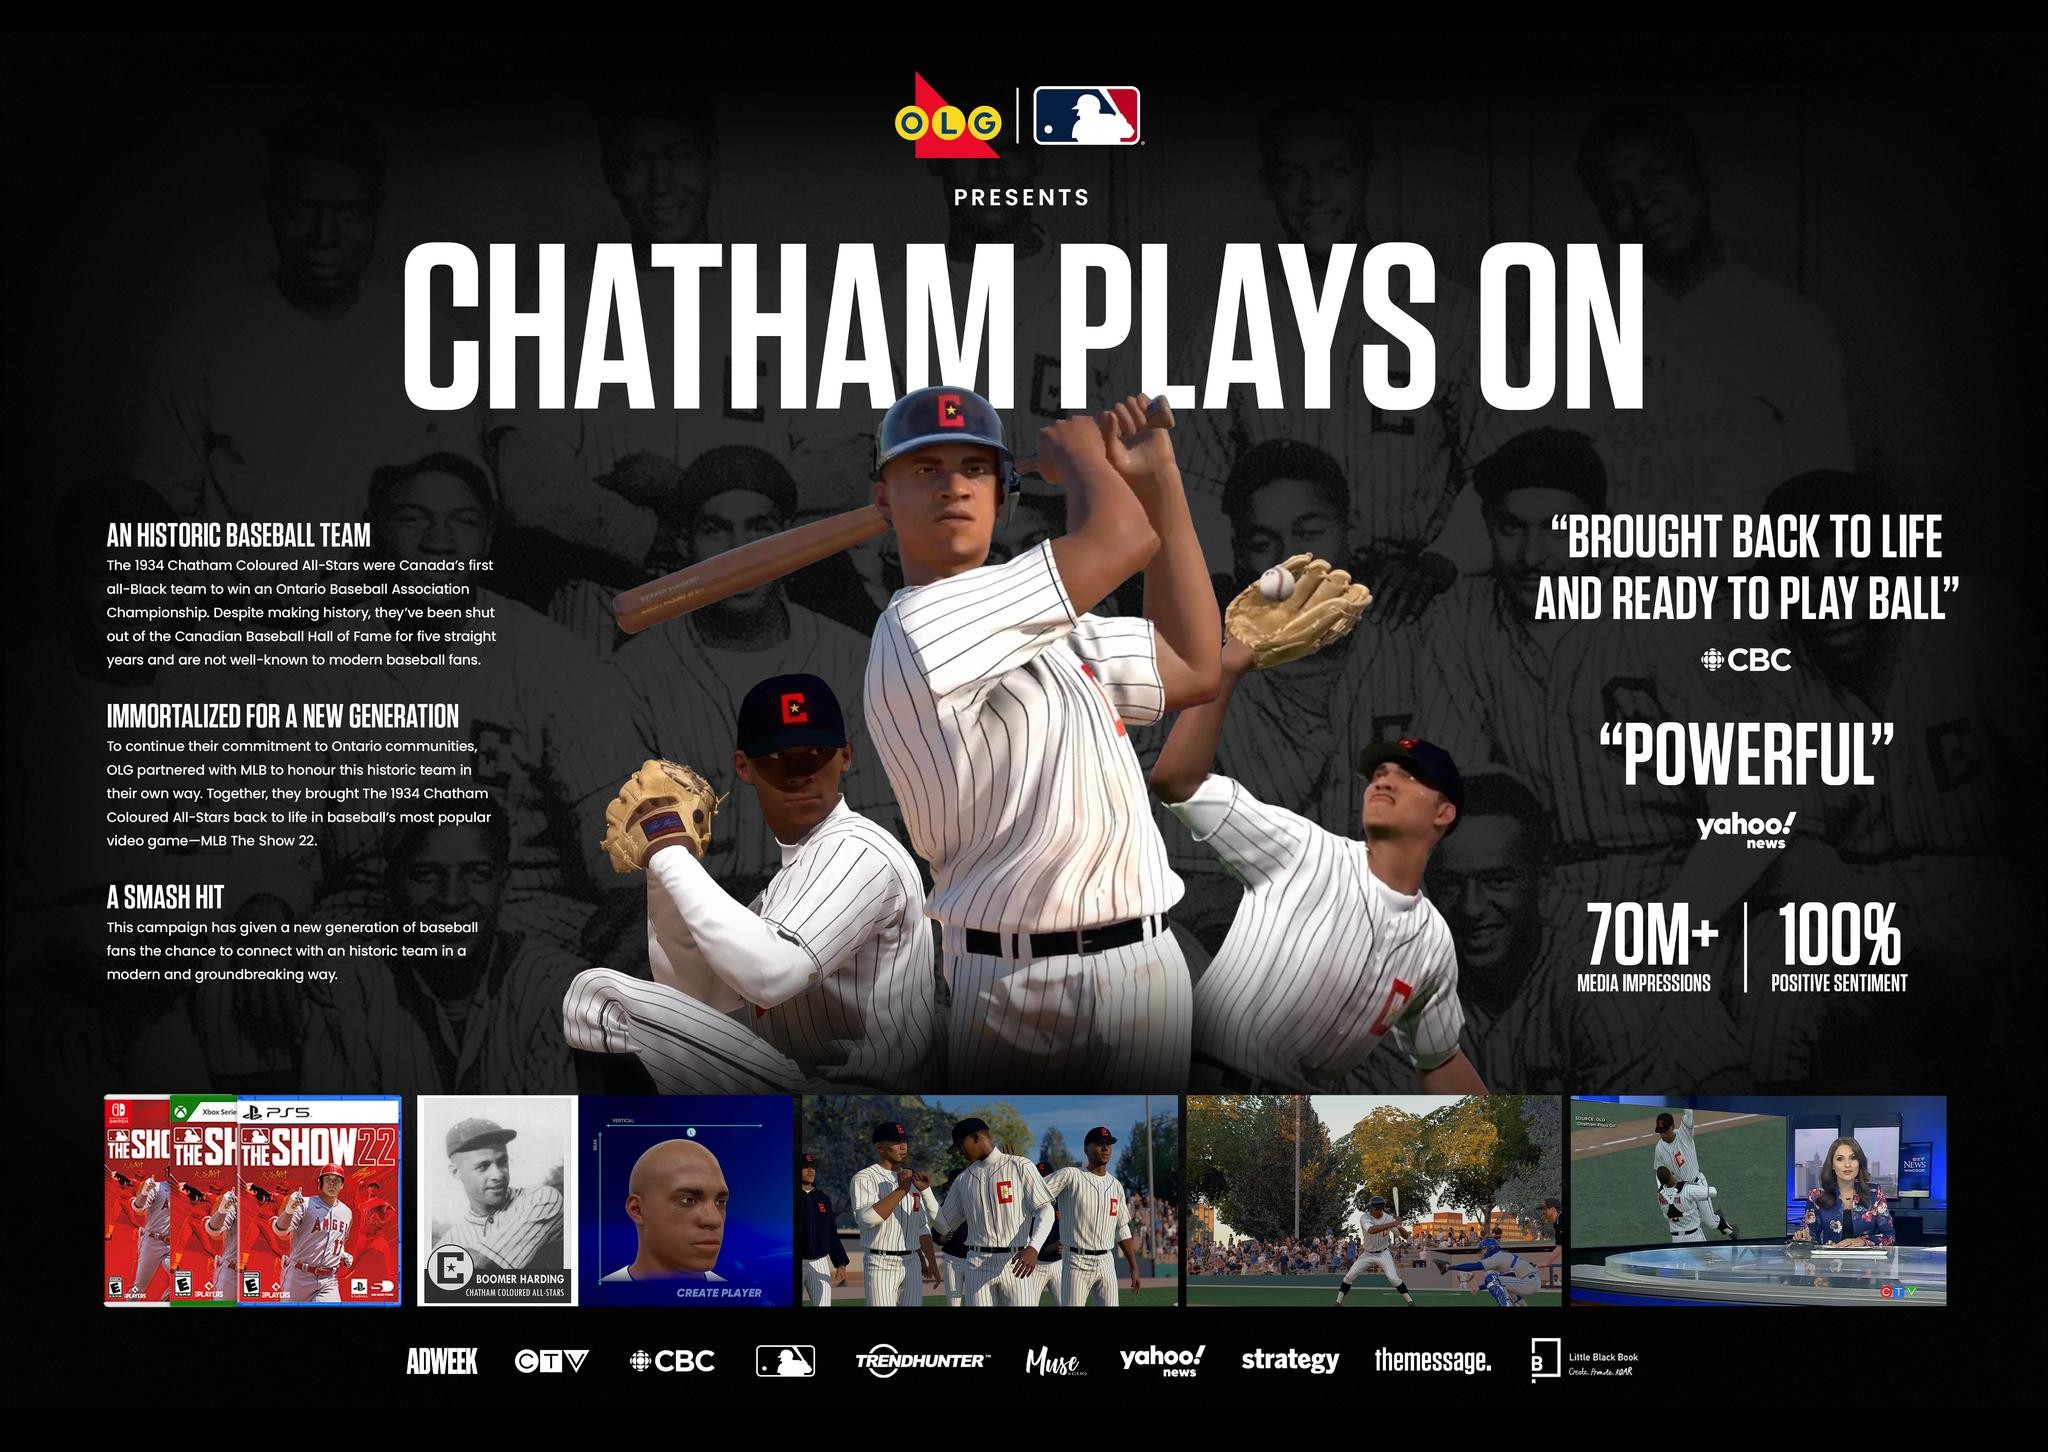 Chatham Plays On